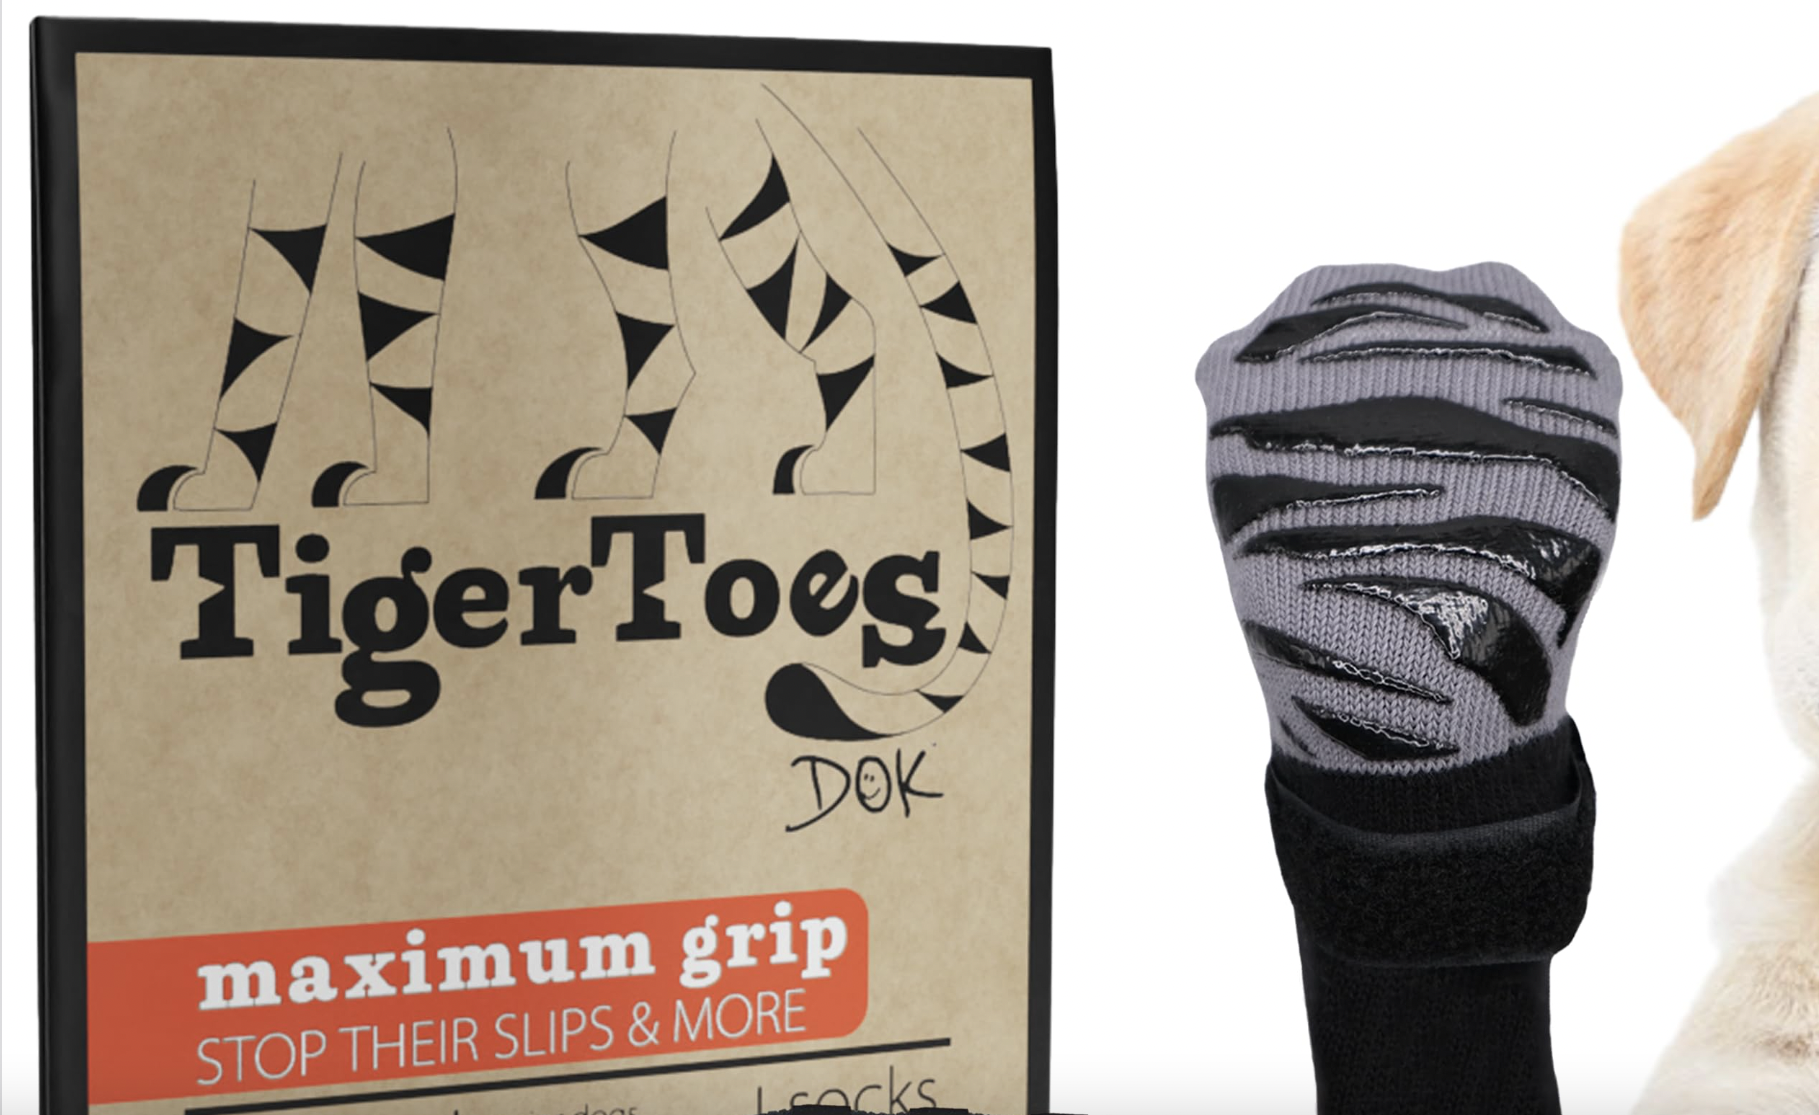 Traction Socks - Dr. Buzby's ToeGrips for Dogs